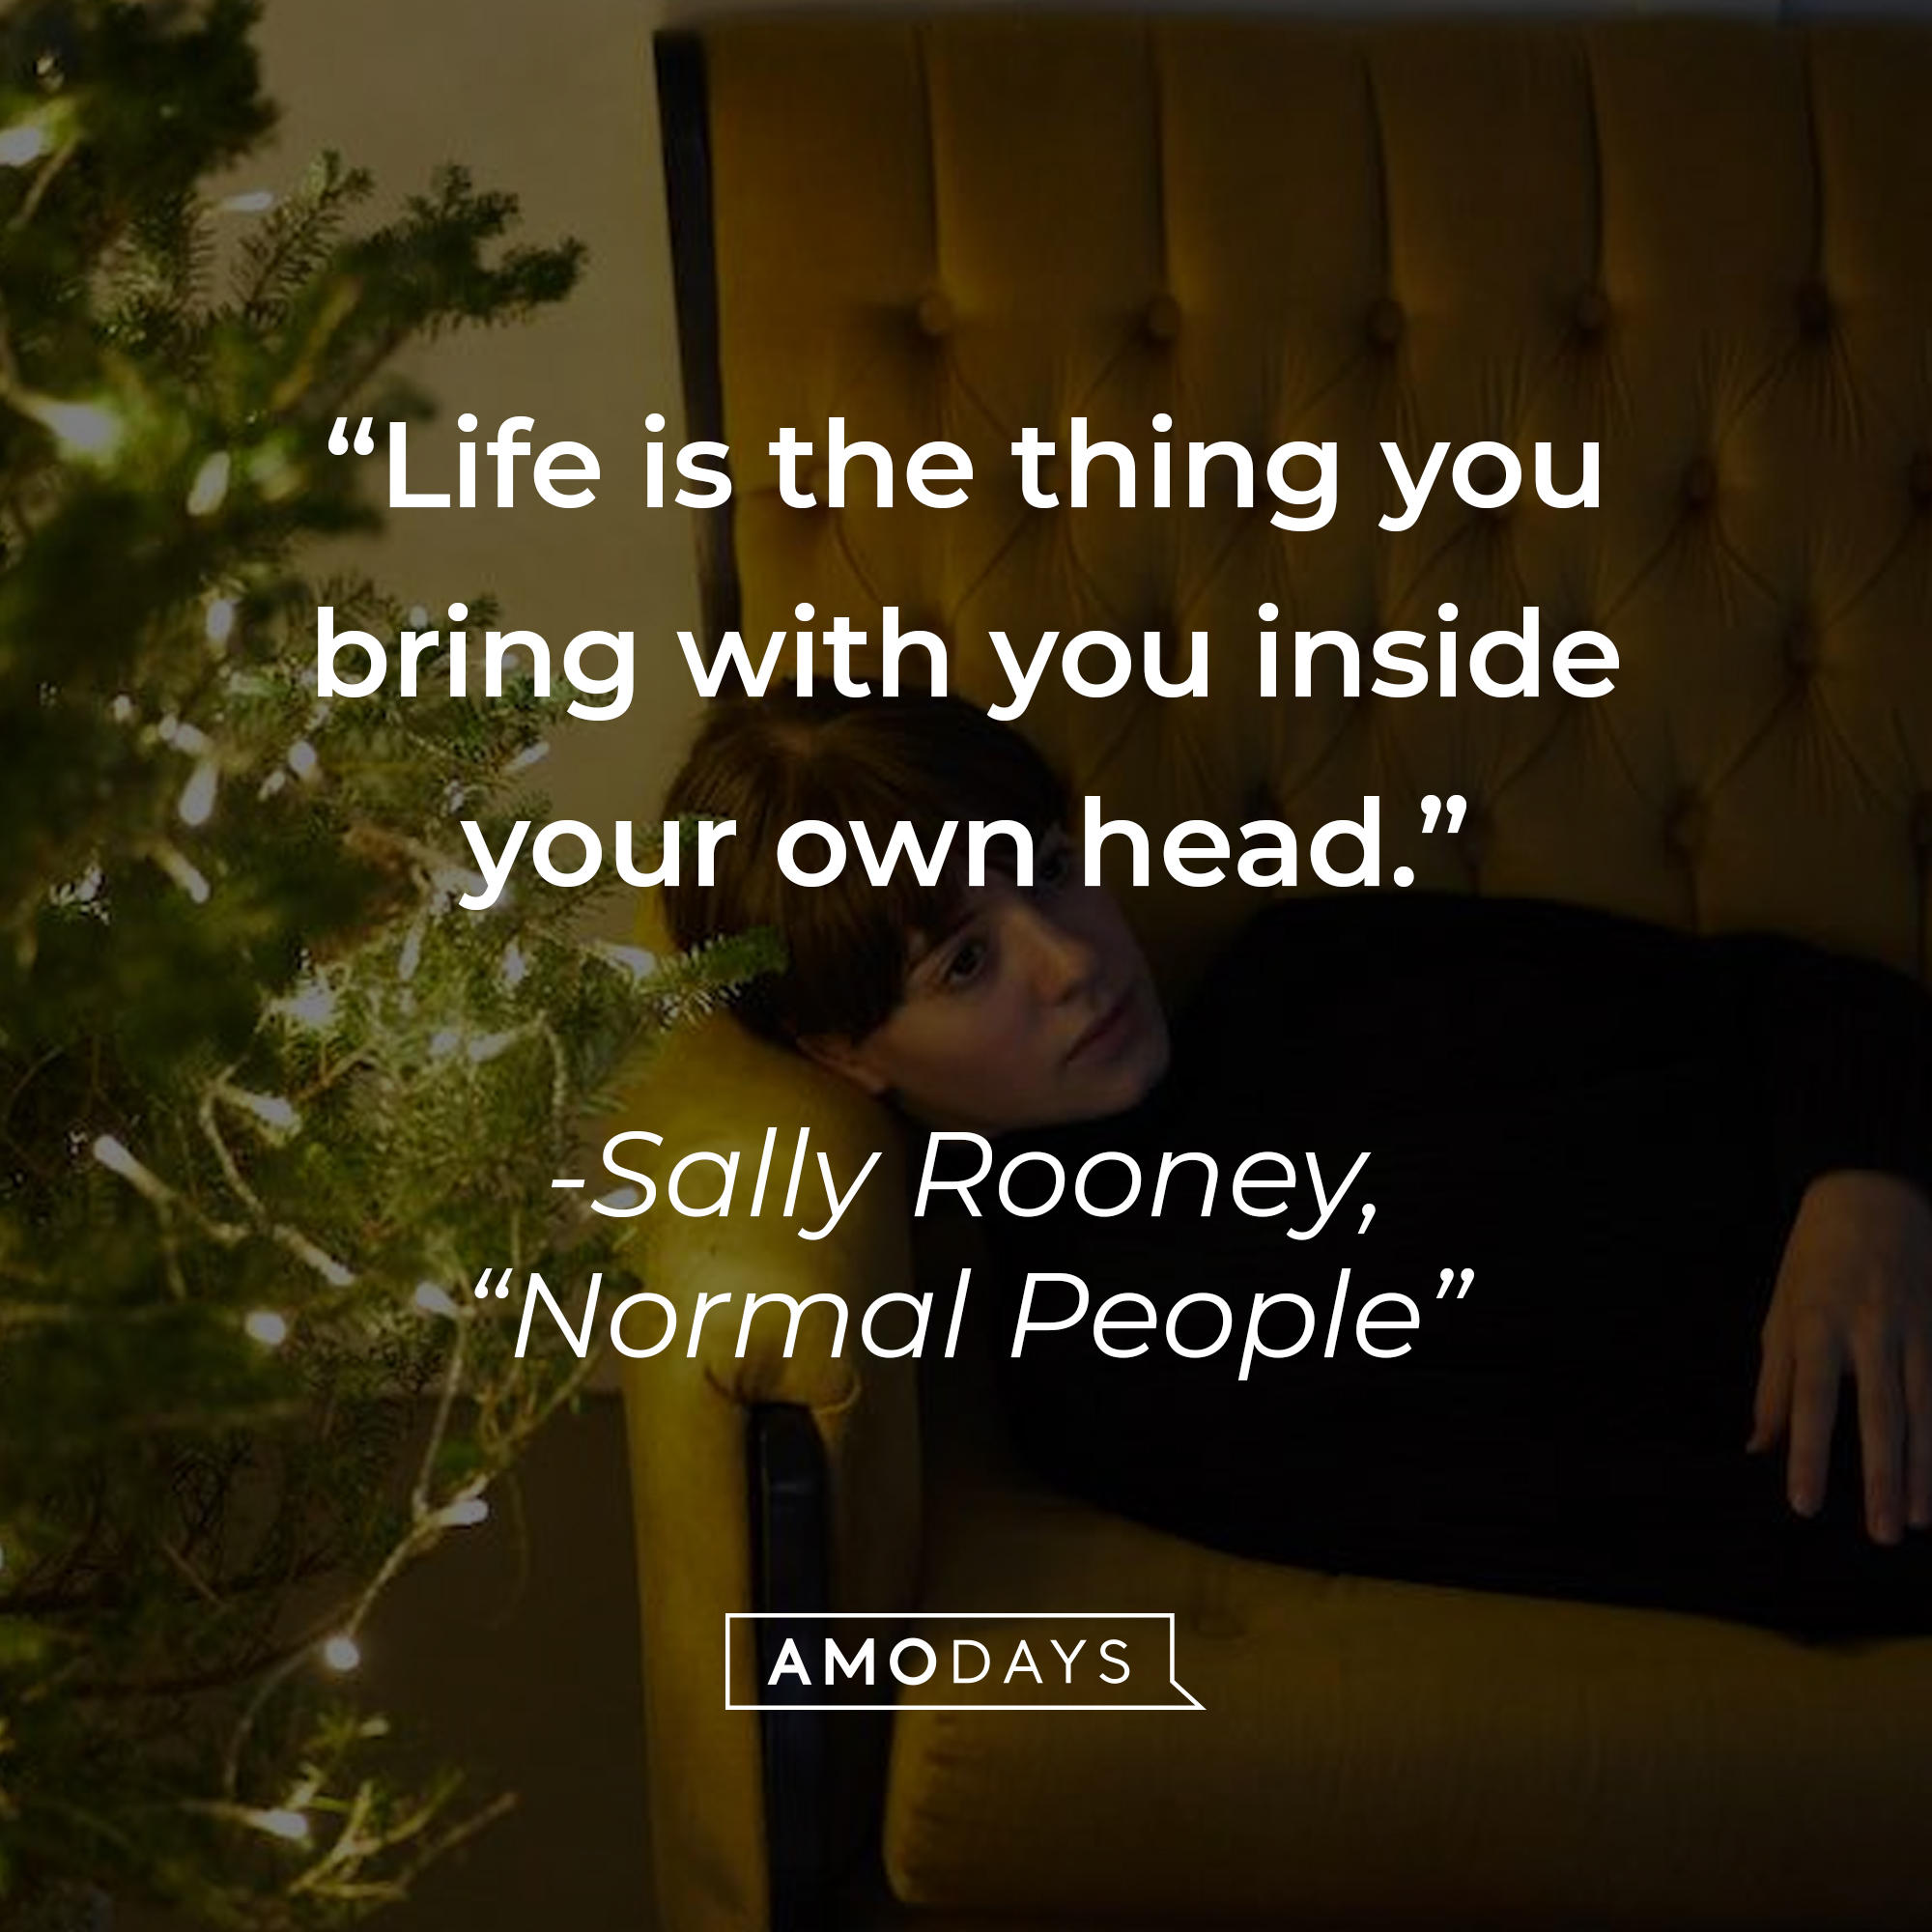 Marianne, with Sally Rooney’s quote from her novel, “Normal People”: “Life is the thing you bring with you inside your own head.” |Source: AmoDays